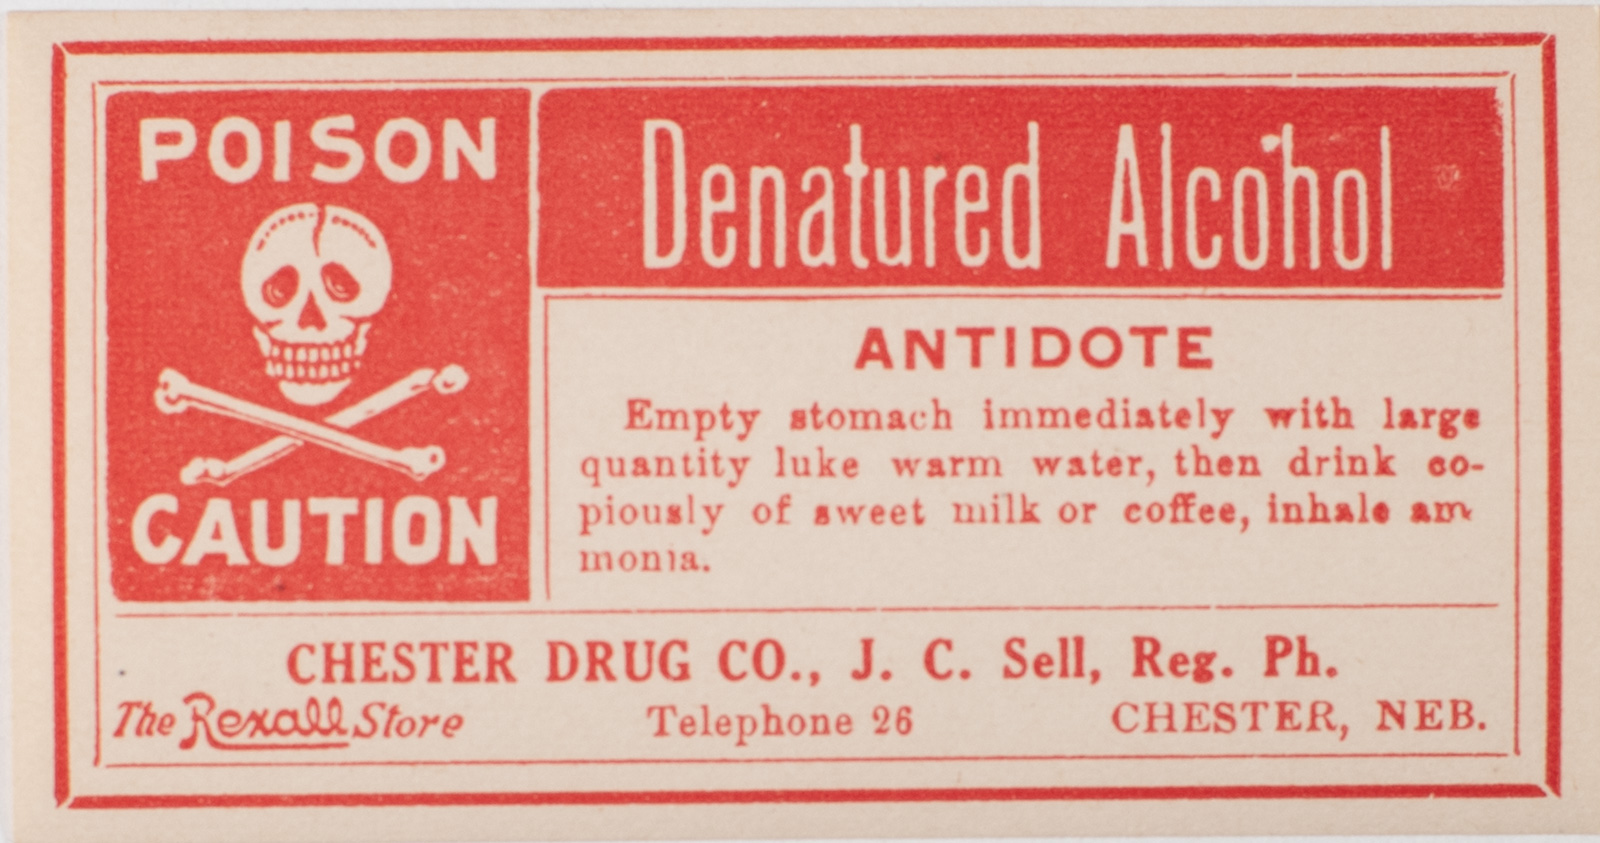 Denatured Alcohol Label from Chester Drug Co-image